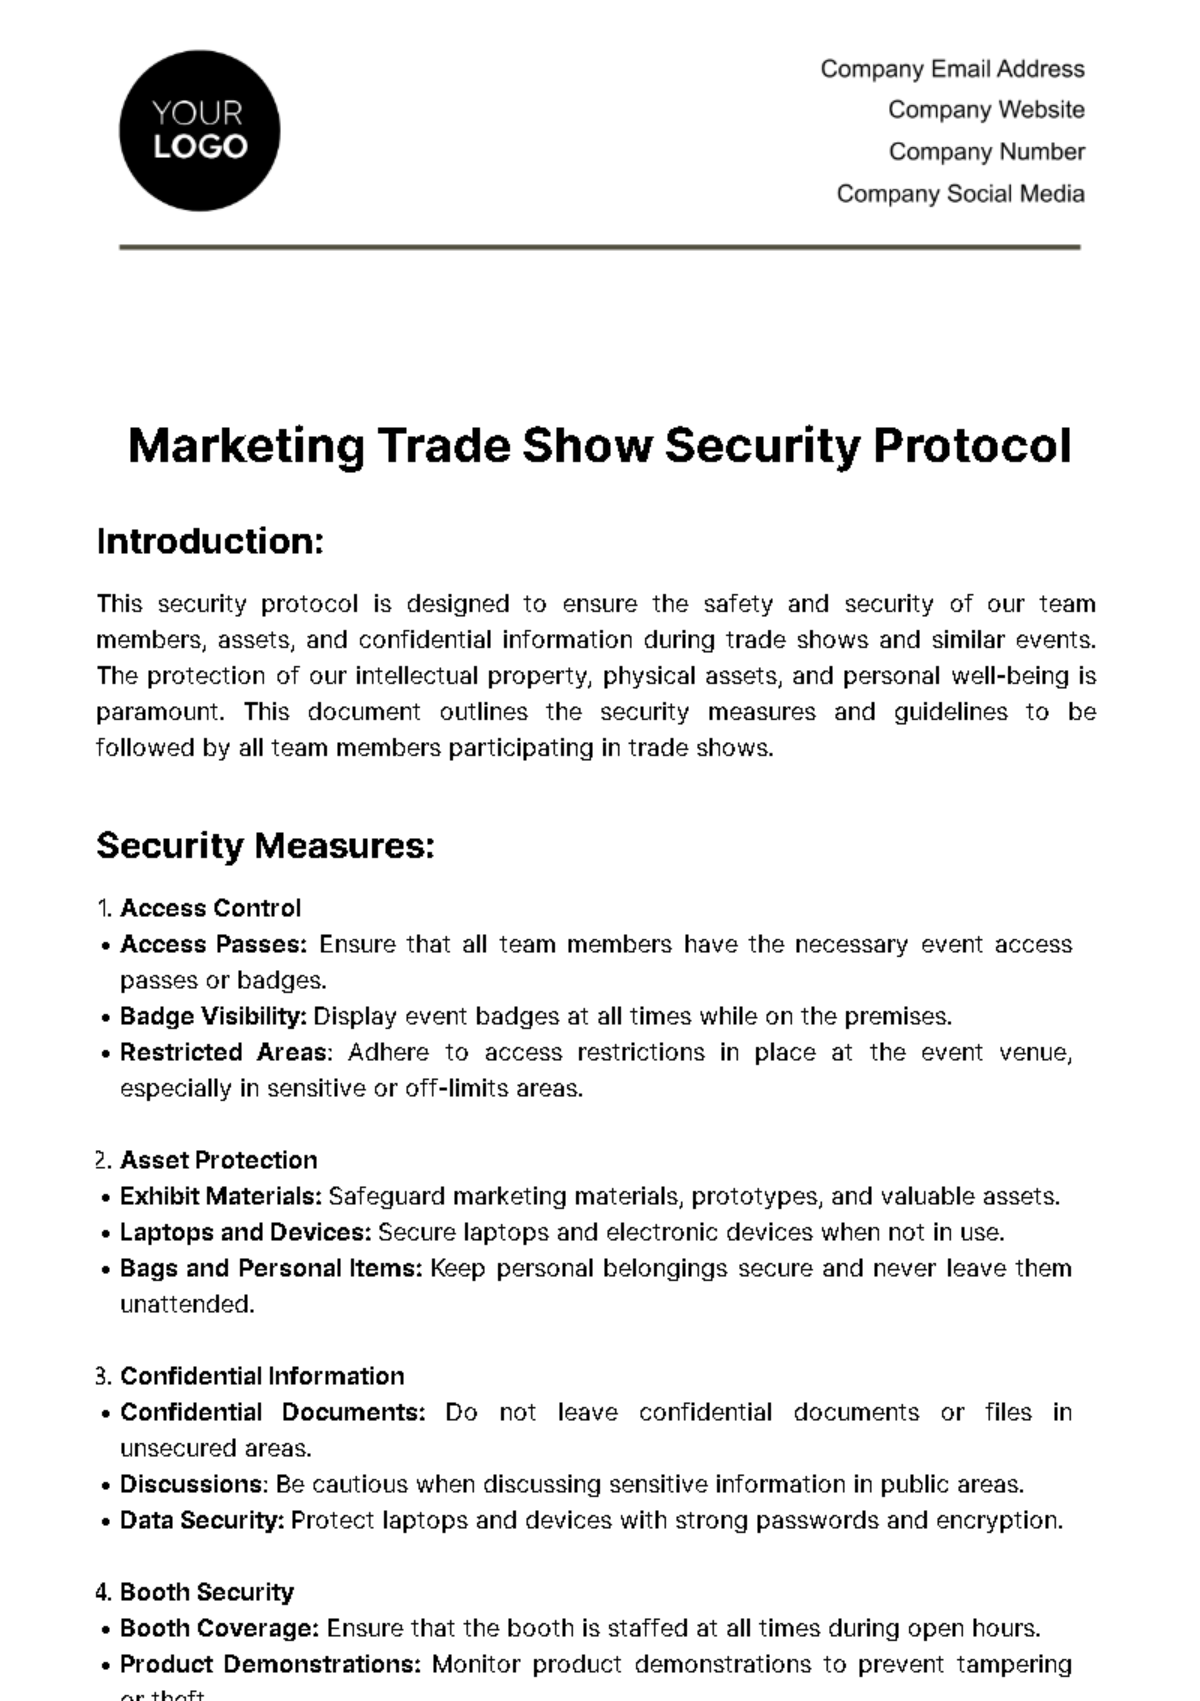 Marketing Trade Show Security Protocol Template